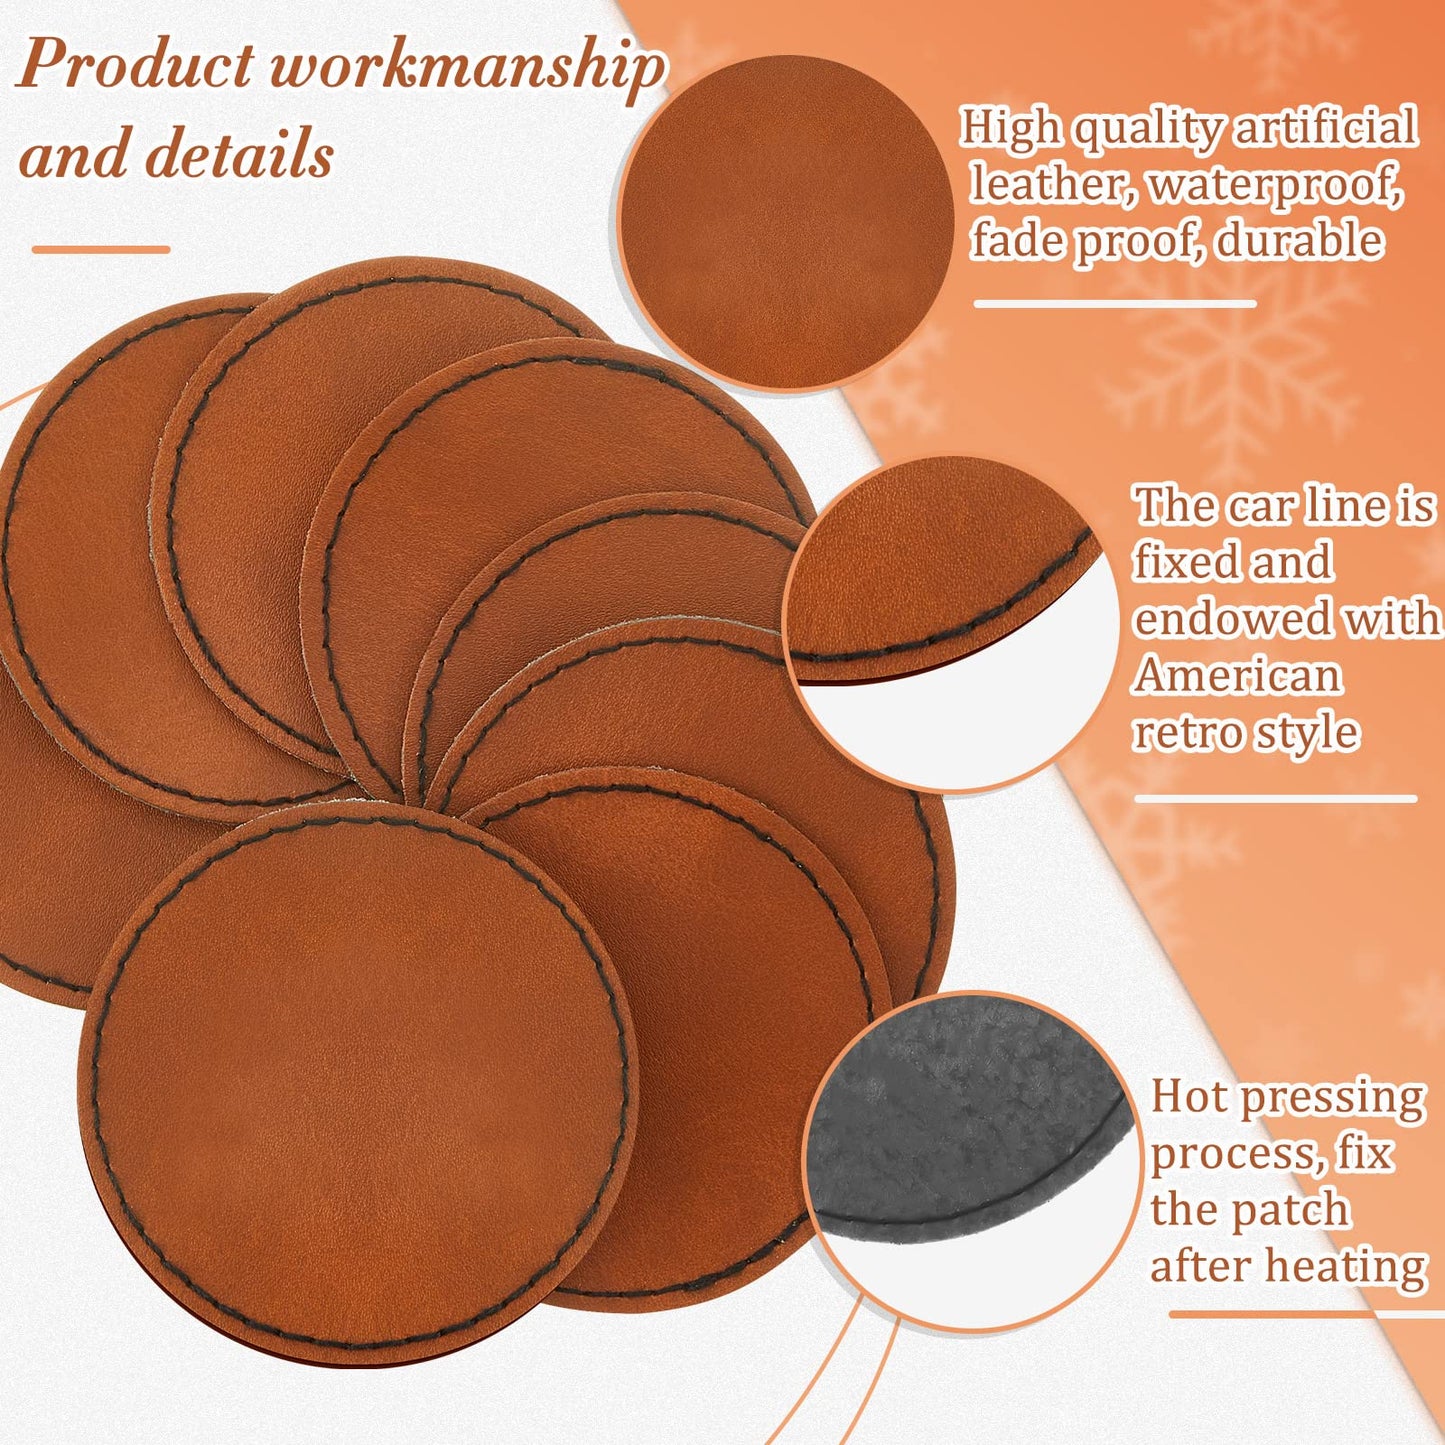 30 Pcs Blank Leather Hat Patches with Adhesive Round Laserable Leatherette Patch Brown Faux Leather Patches Glowforge Laser Supplies for Hats,